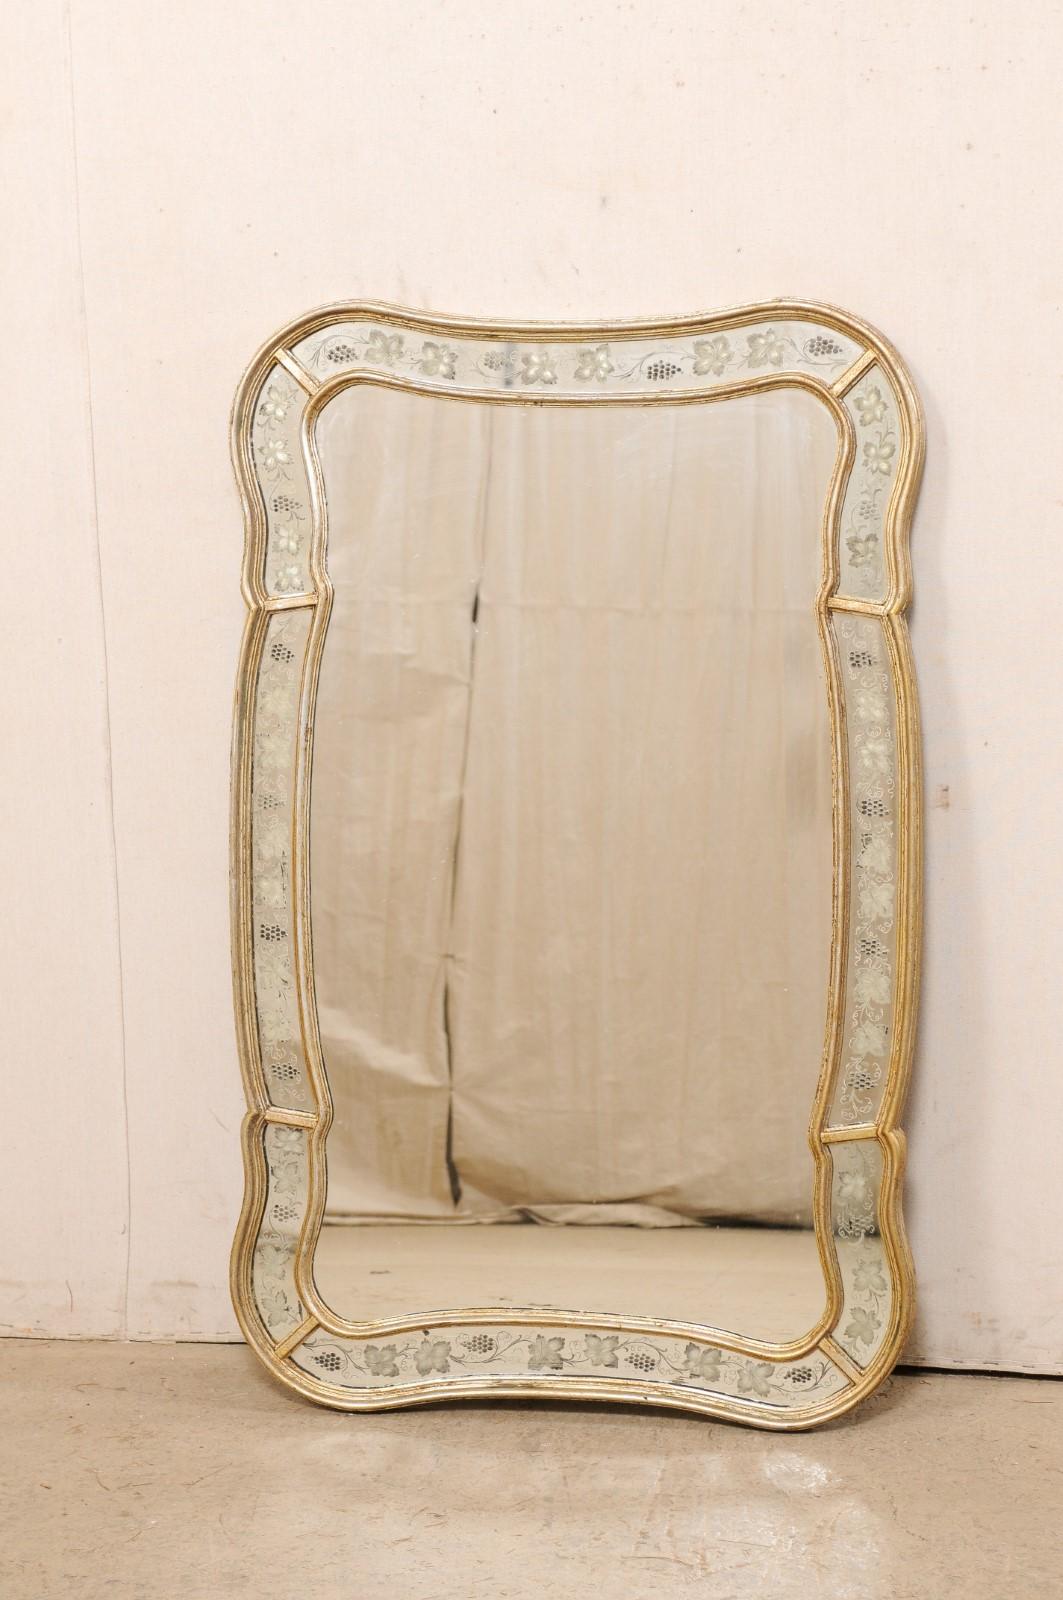 A shapely Italian mirror with grapevine motif surround, standing approximately 4 feet in height. This vintage mirror from Italy has a mostly rectangular shape, but more curvy and softened with gentle scalloping. The inner mirror is framed within a